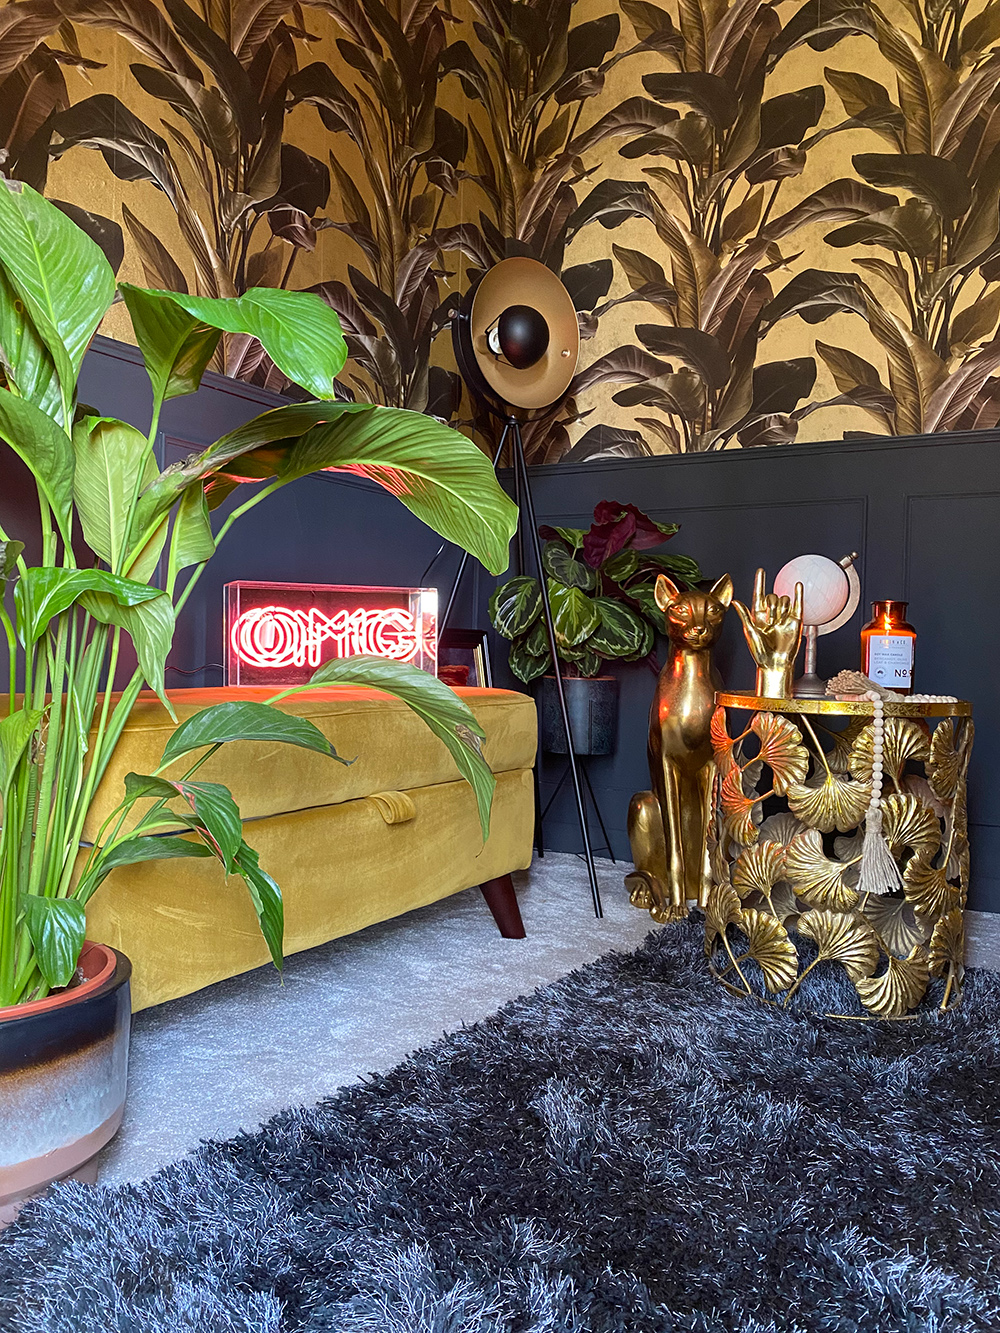 Gorgeous decor by Glen of @inside.number.twelve. We love the metallic effect patterned wallpaper, styled with our Gold Ginkgo Leaf Side Table, Gold Rock On Hand, Gold Sphynx Cat and Pink OMG Neon Sign